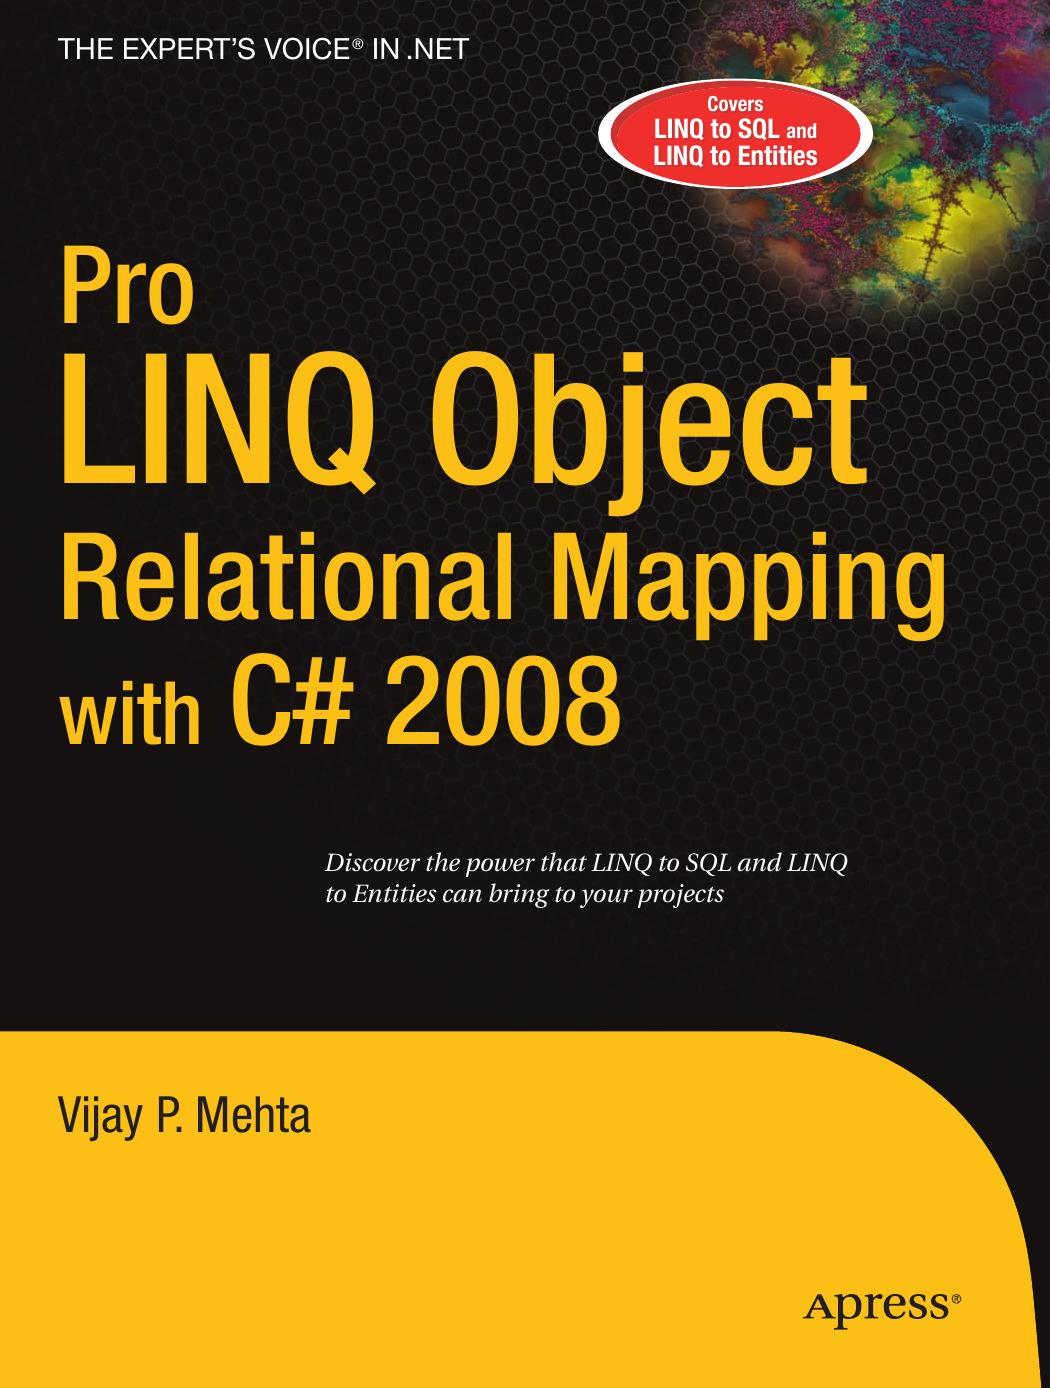 Pro LINQ Object Relational Mapping. 2008